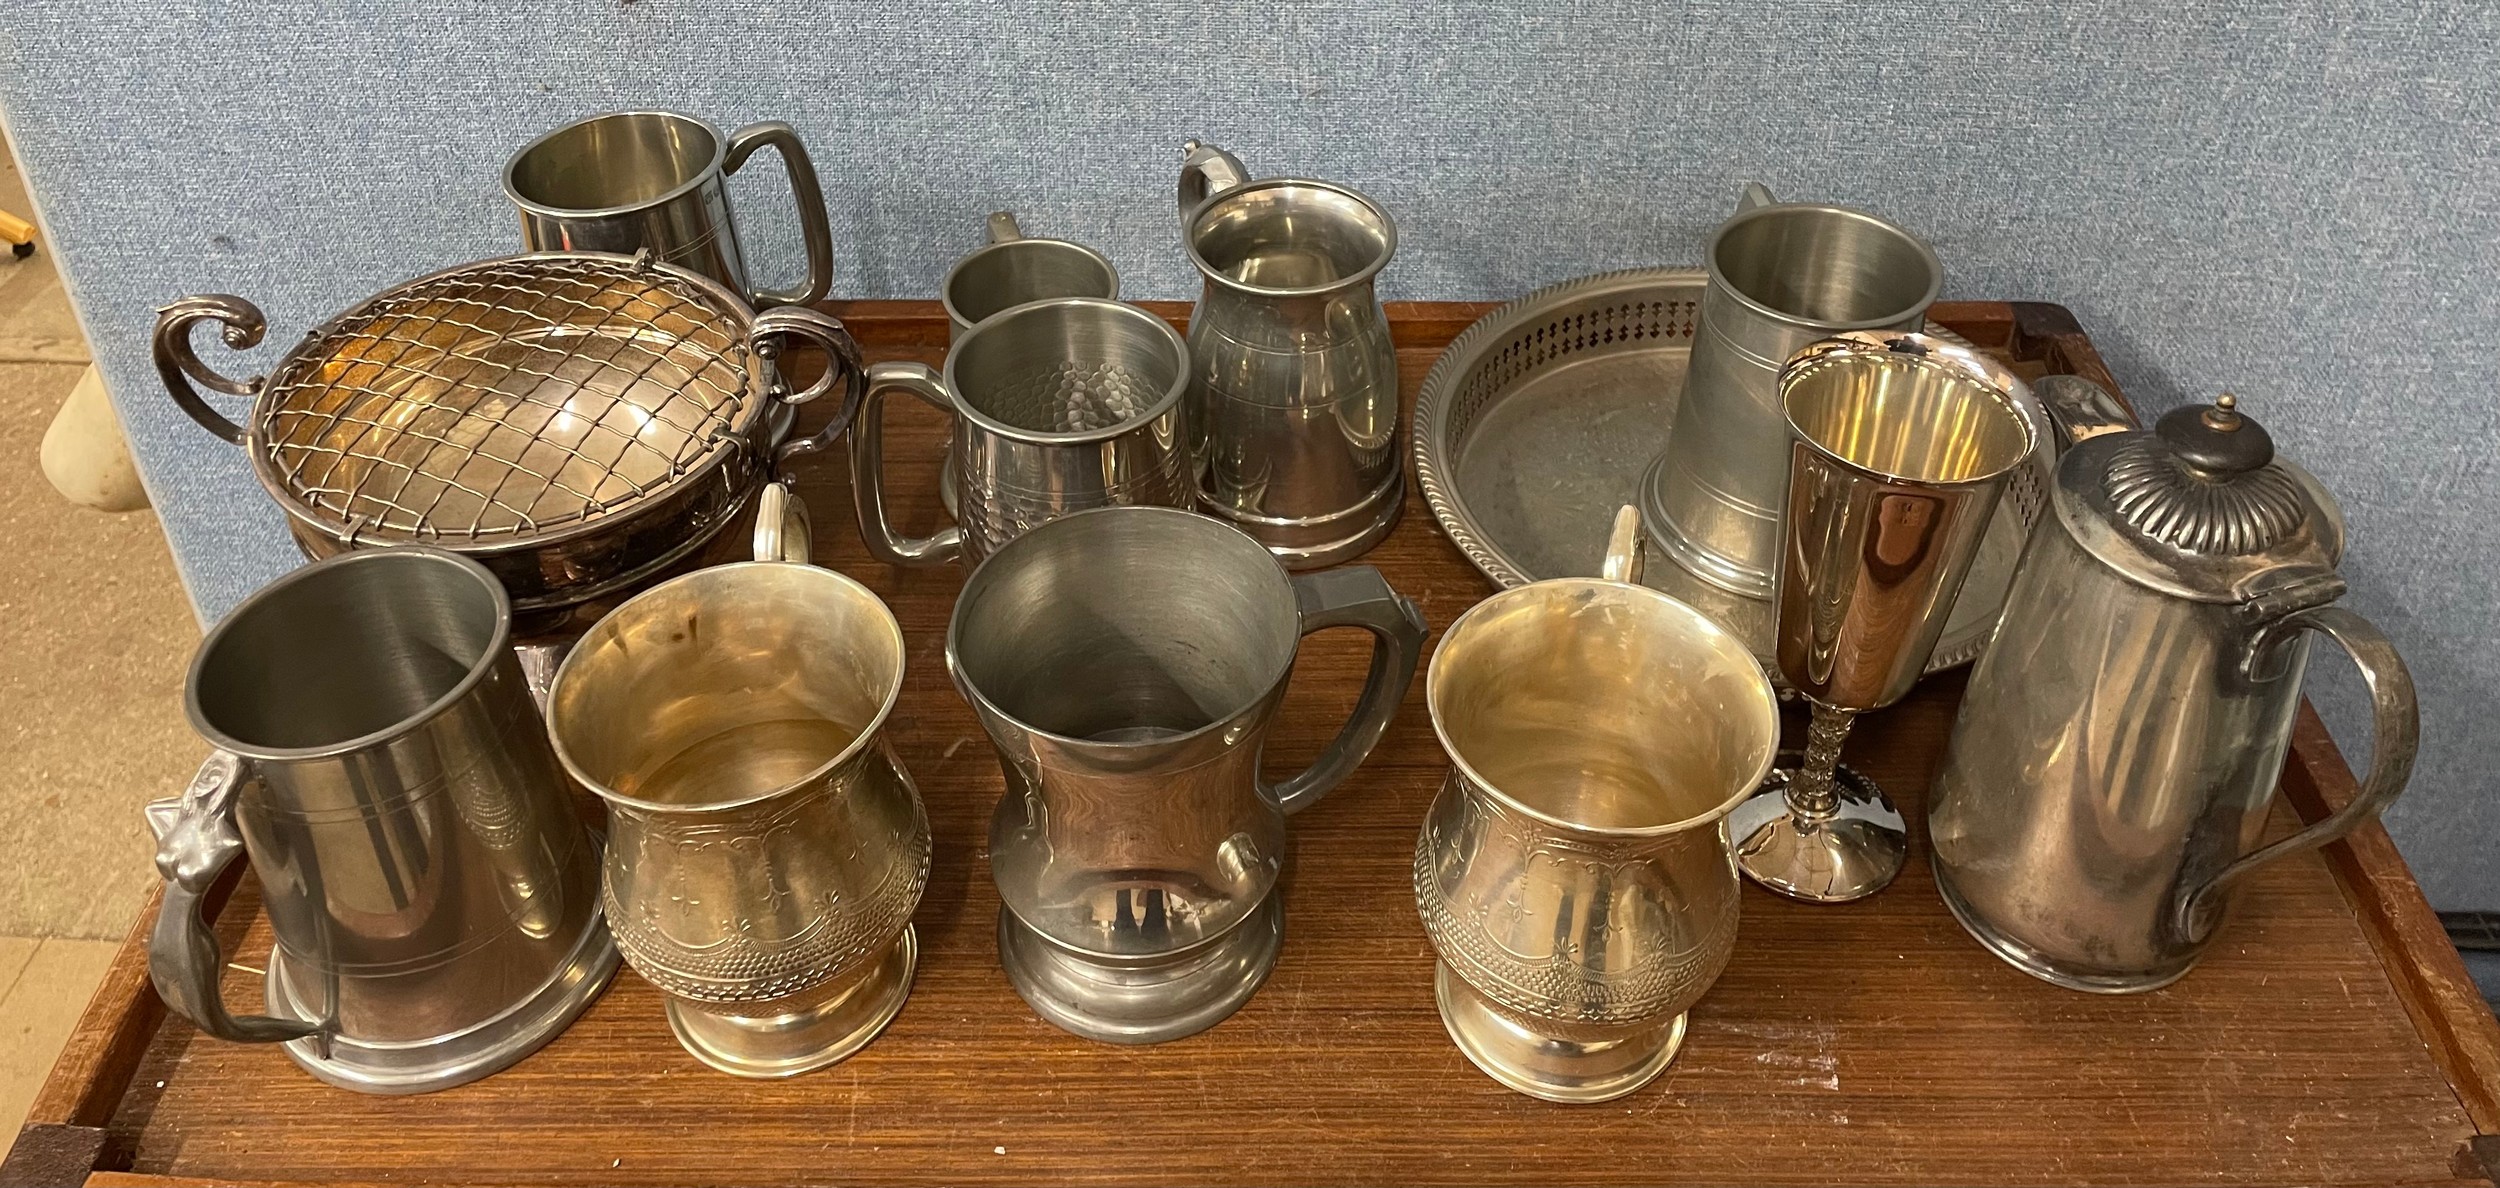 A collection of tankards and plated ware